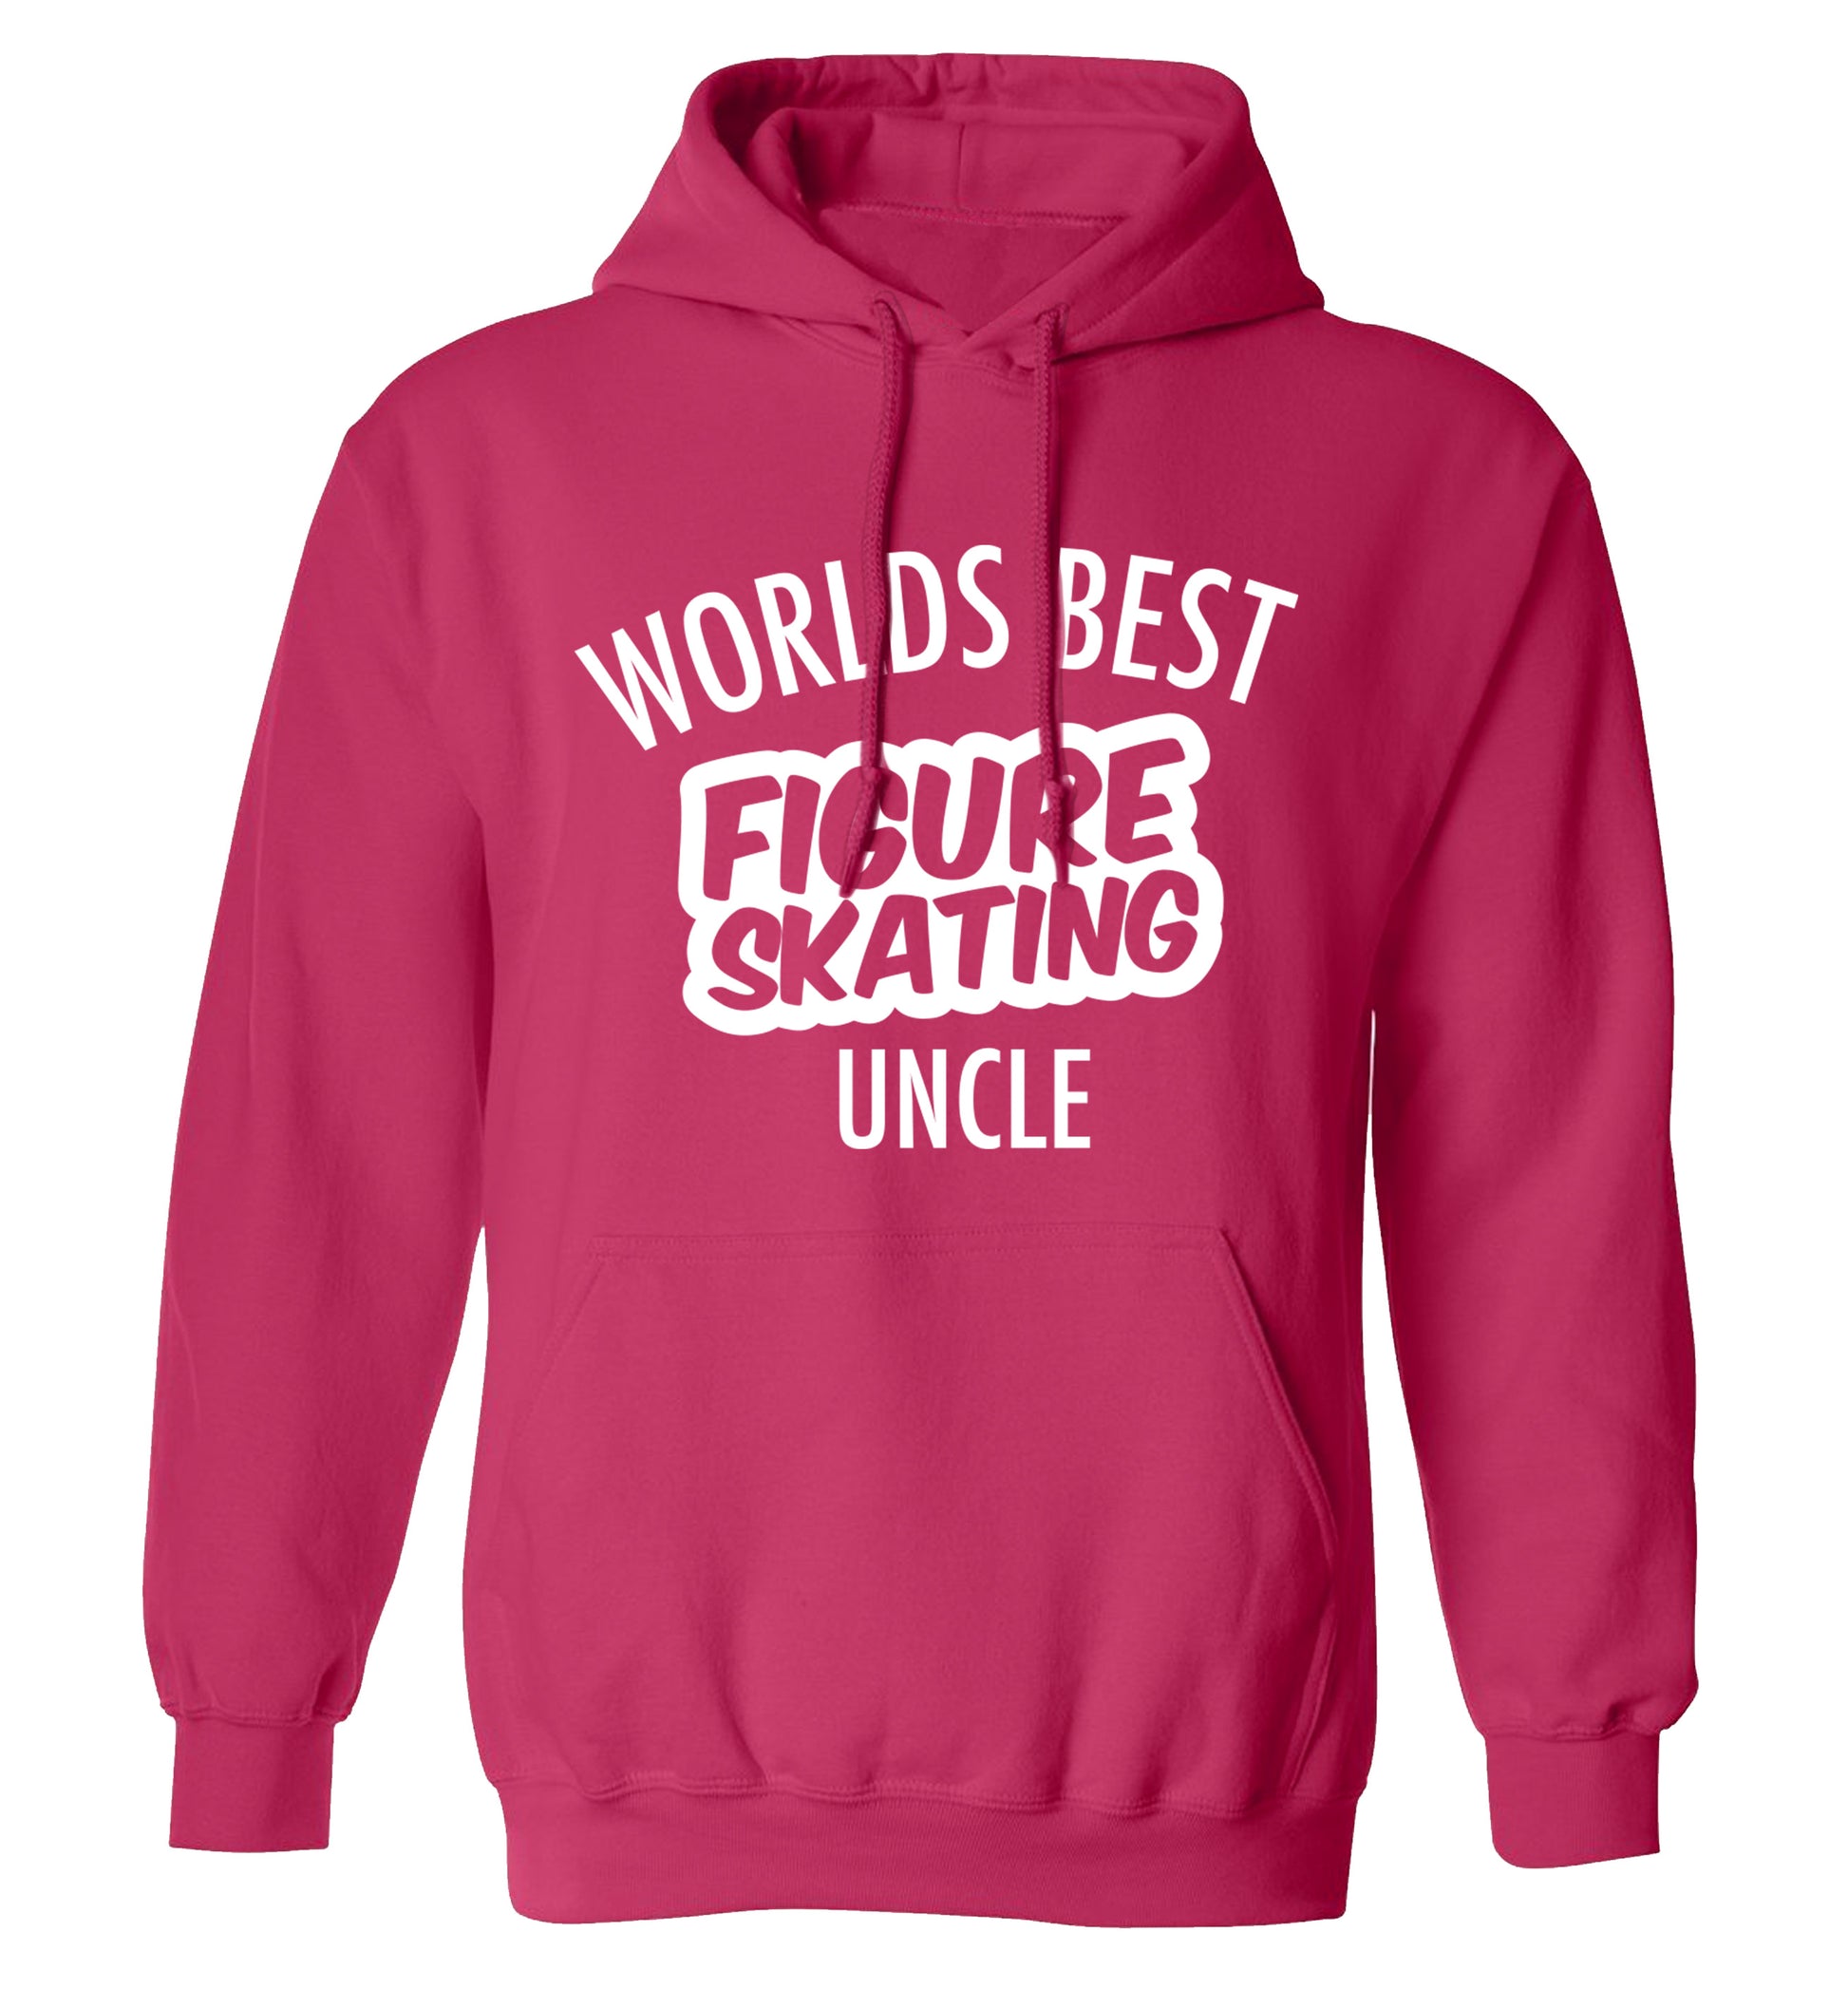 Worlds best figure skating uncle adults unisexpink hoodie 2XL